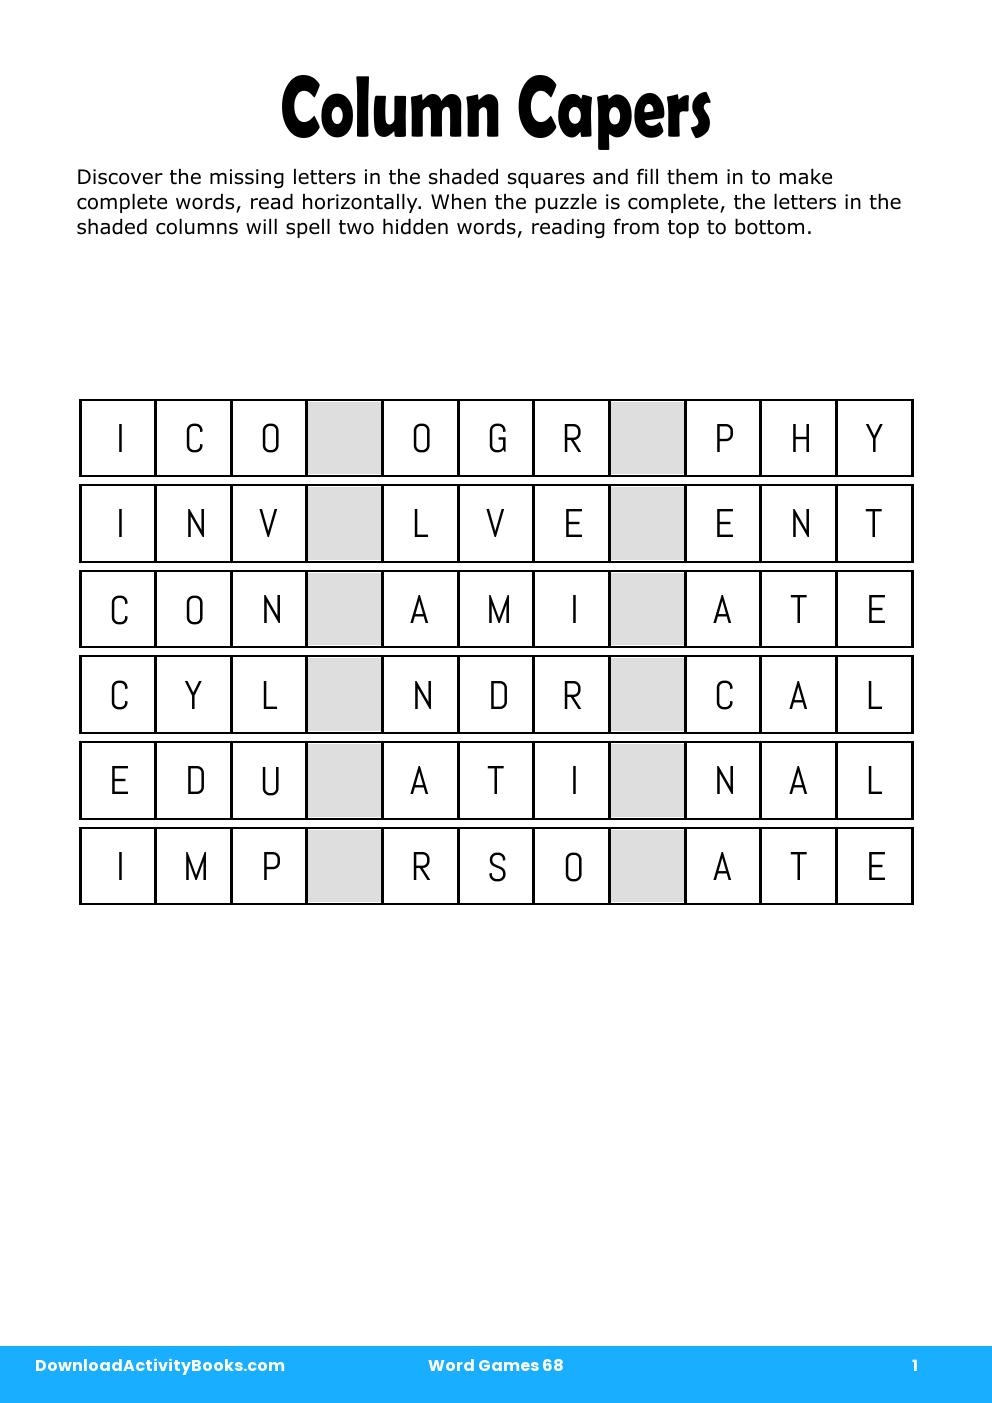 Column Capers in Word Games 68